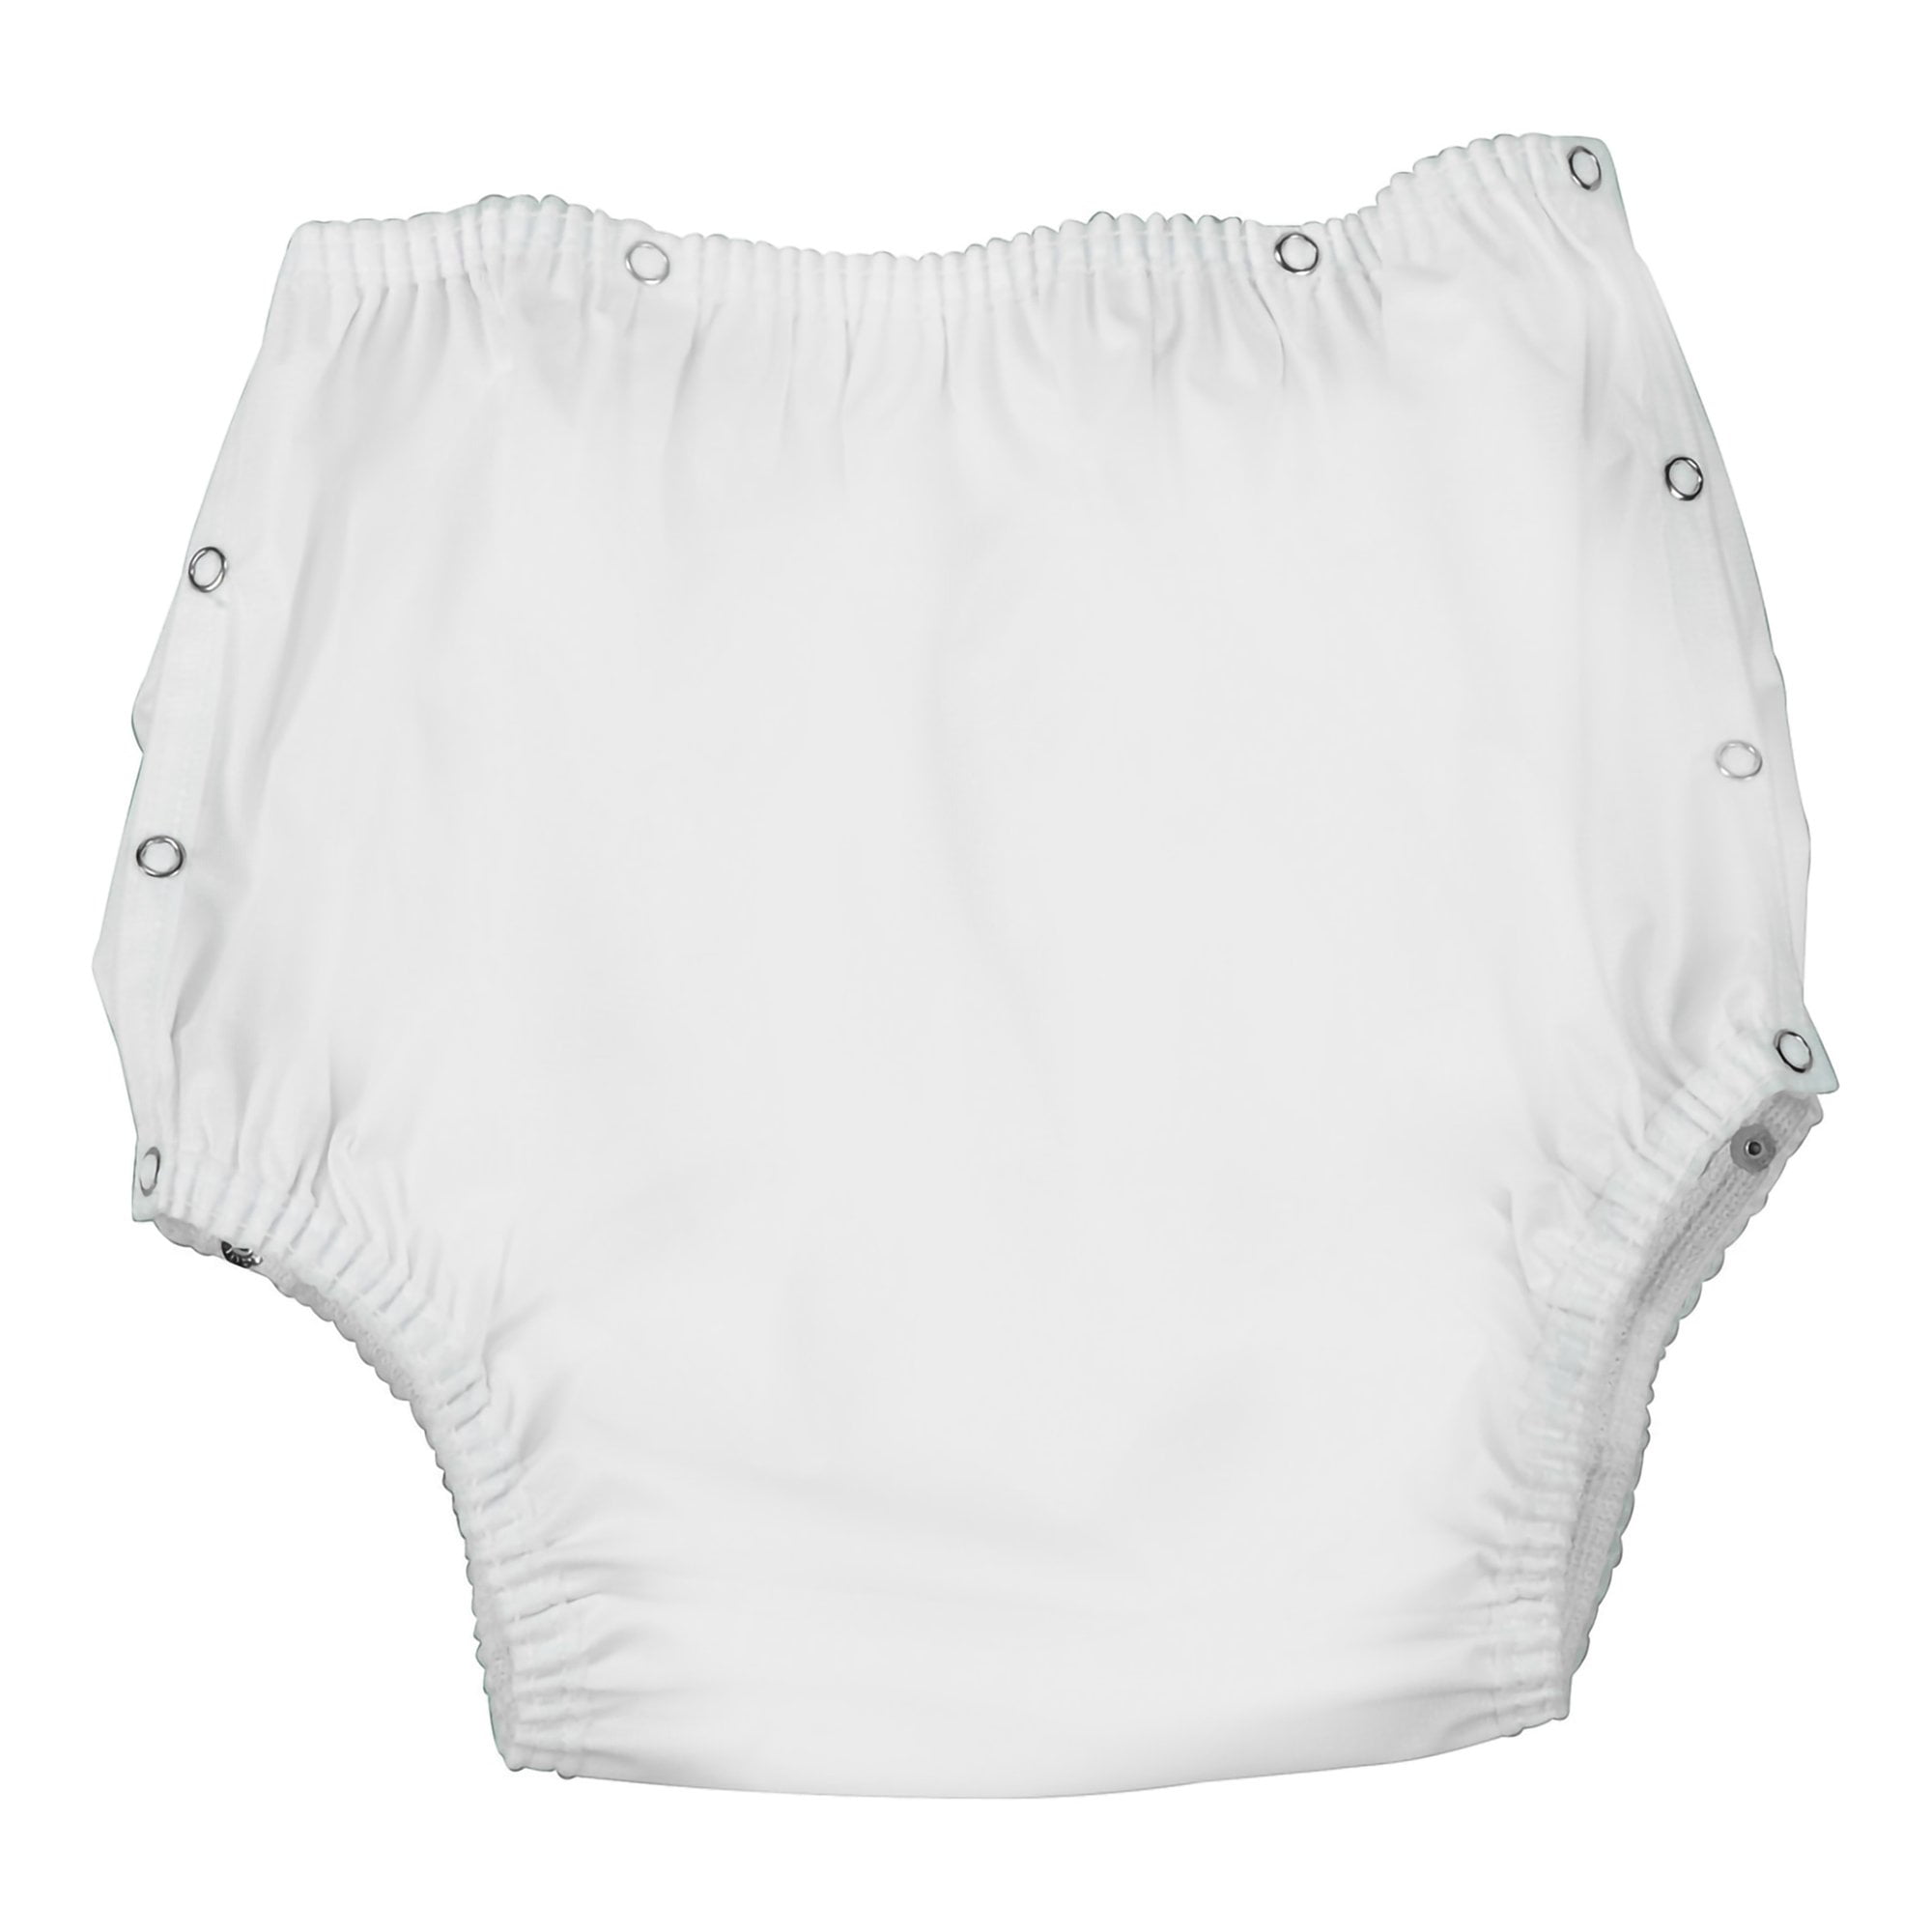 Elderly Diaper Pants Soft Waterproof Incontinence Briefs Nappy for